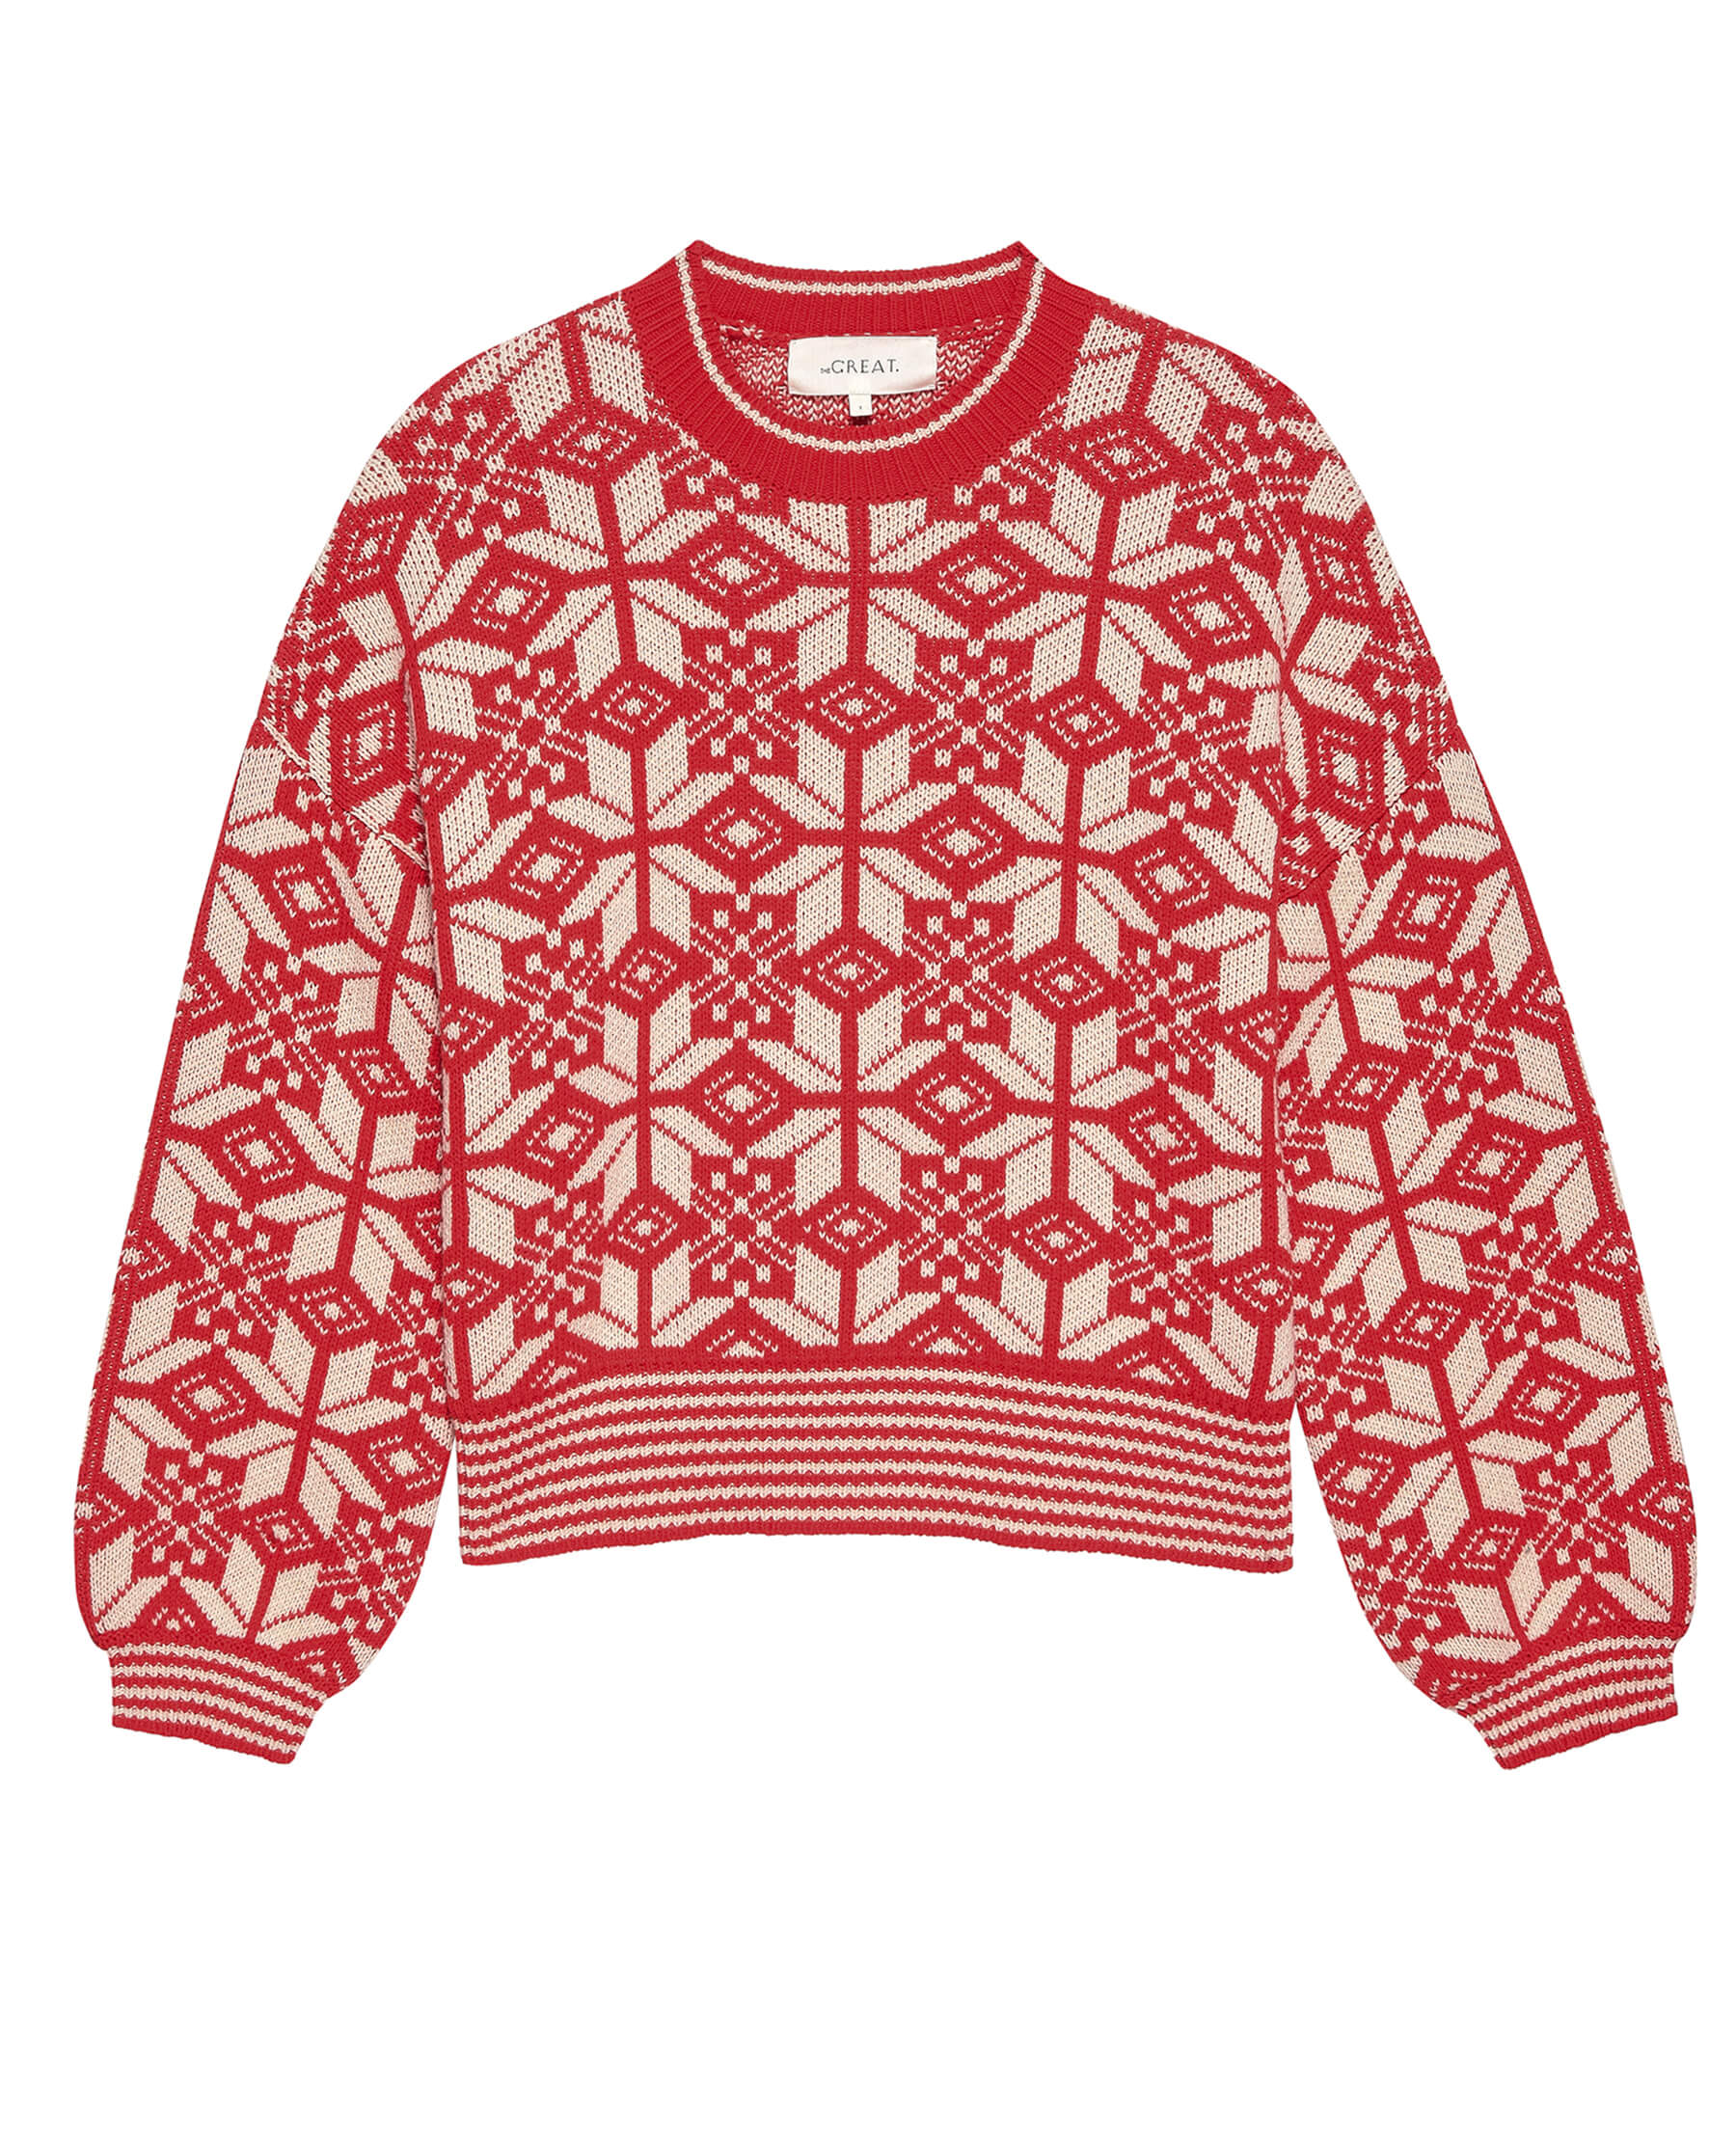 The Snowflake Pullover. -- Alpine Spice SWEATERS THE GREAT. HOL 23 D1 SALE